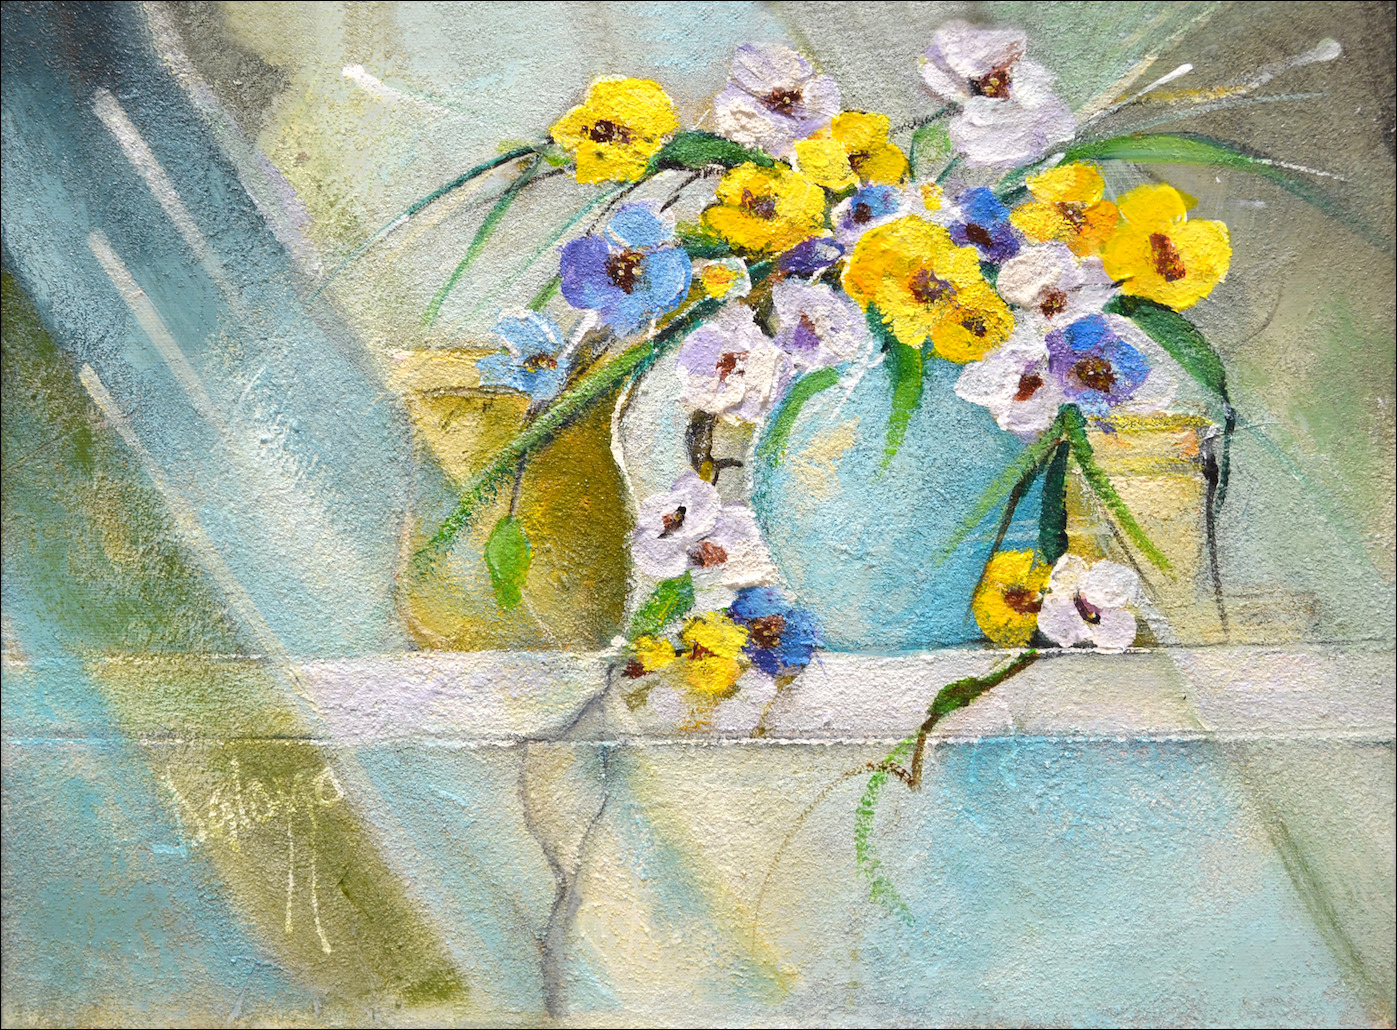 Floral Still Life "Afternoon Sunlight" Original Artwork by Lucette Dalozzo